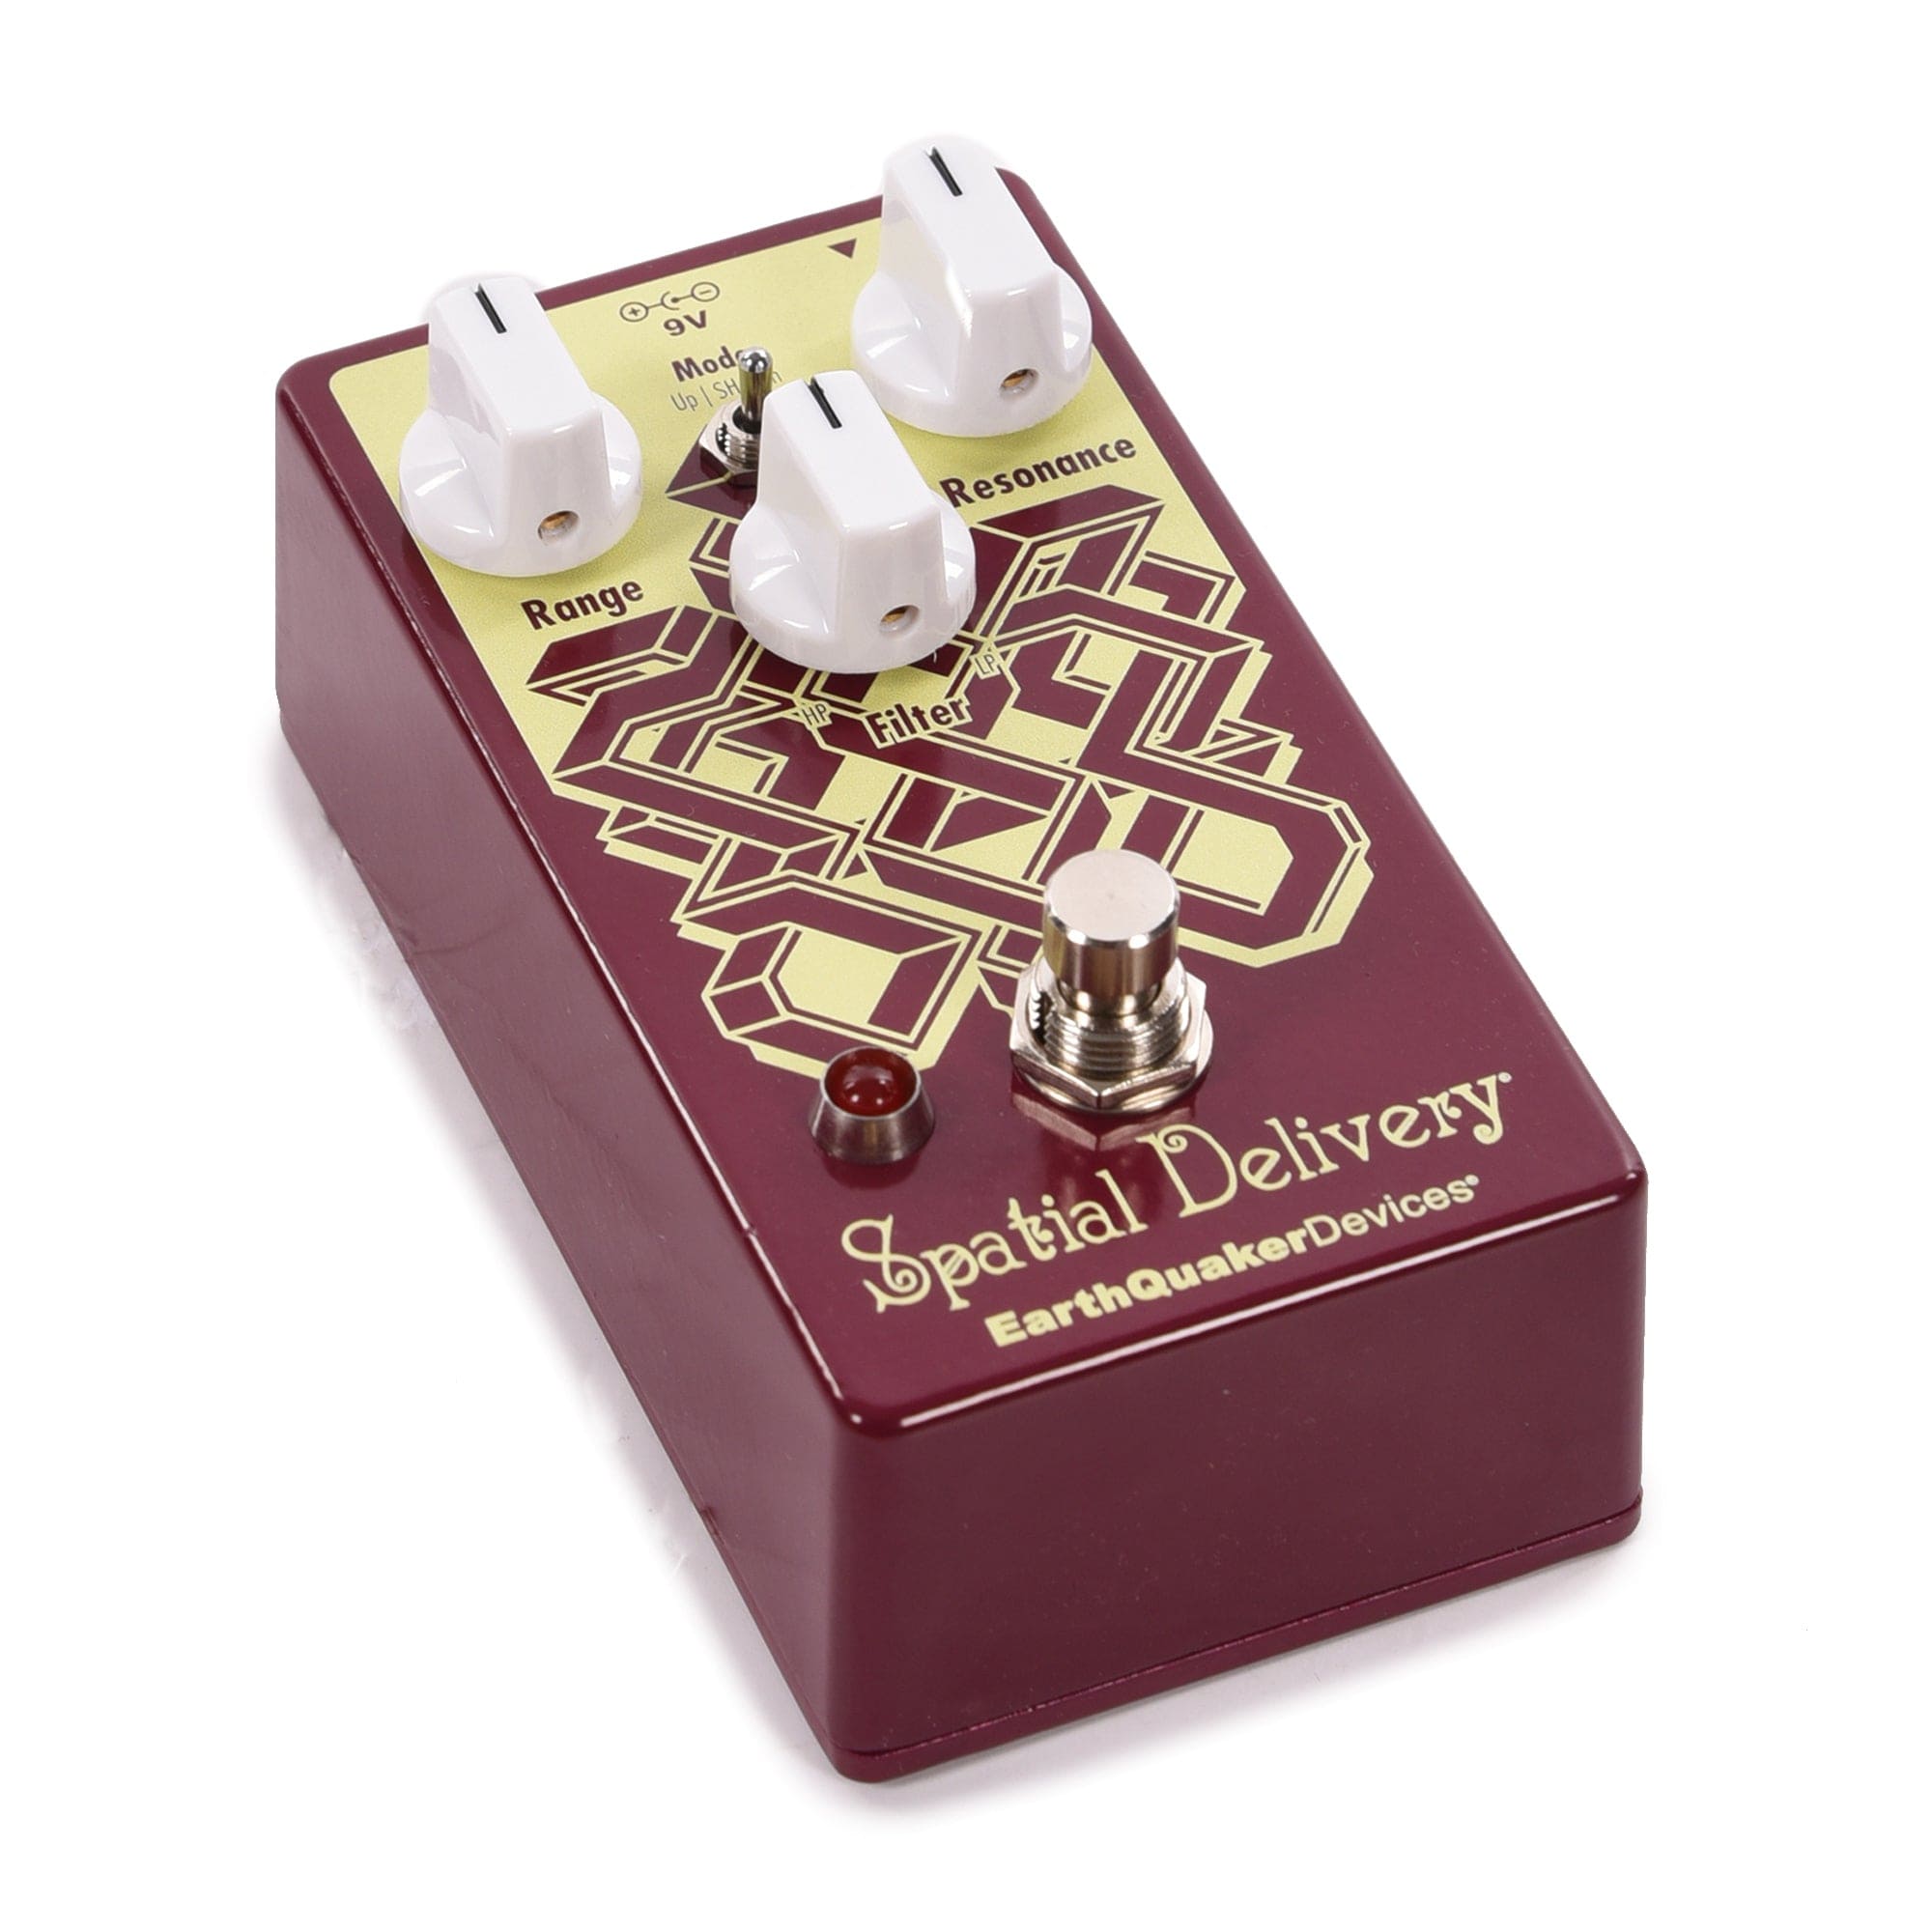 Earthquaker Devices Spatial Delivery V2 Envelope Filter with Sample & Hold Pedal Claret Violet Effects and Pedals / Wahs and Filters